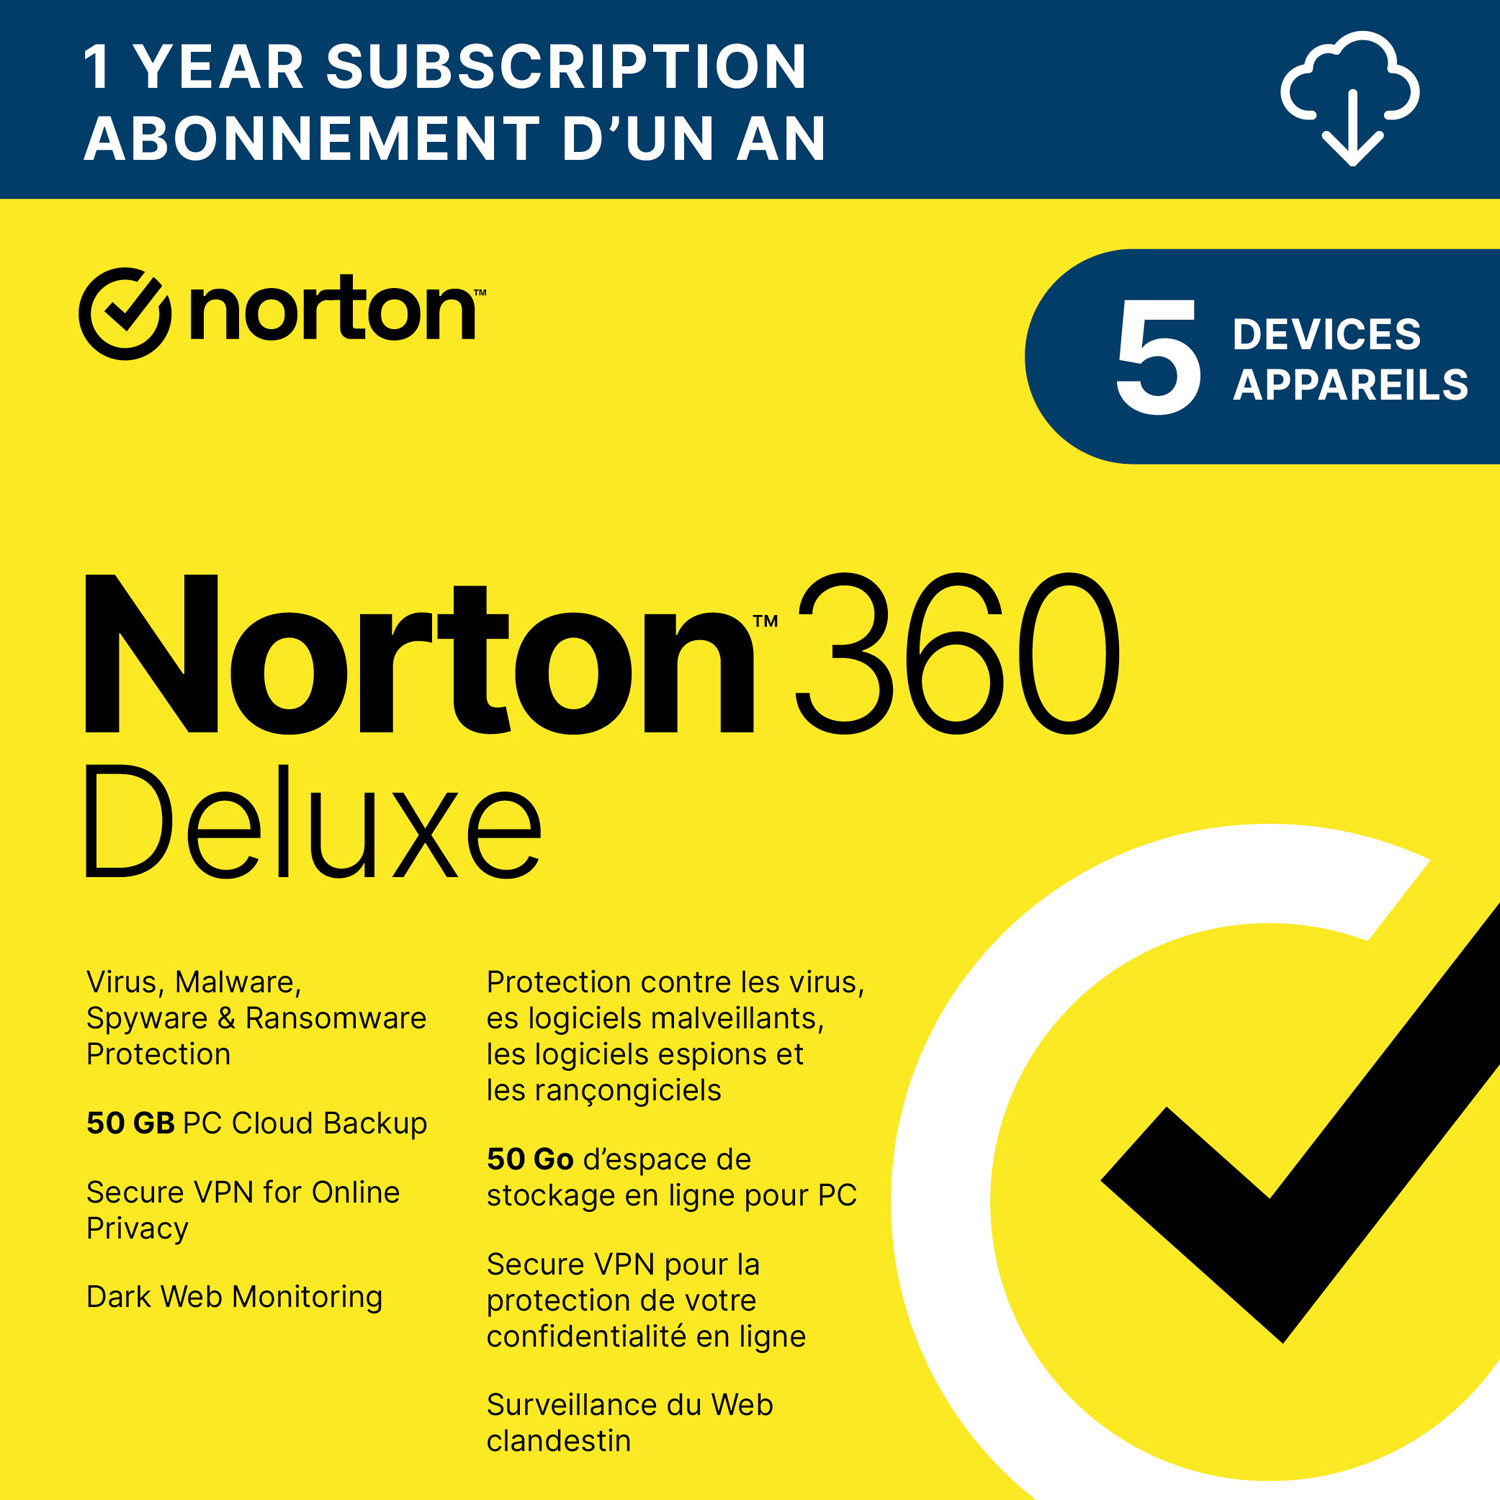 Norton 360 Deluxe (PC/Mac) - 5 Devices - 50GB Cloud Backup - 1-Year Subscription - Digital Download